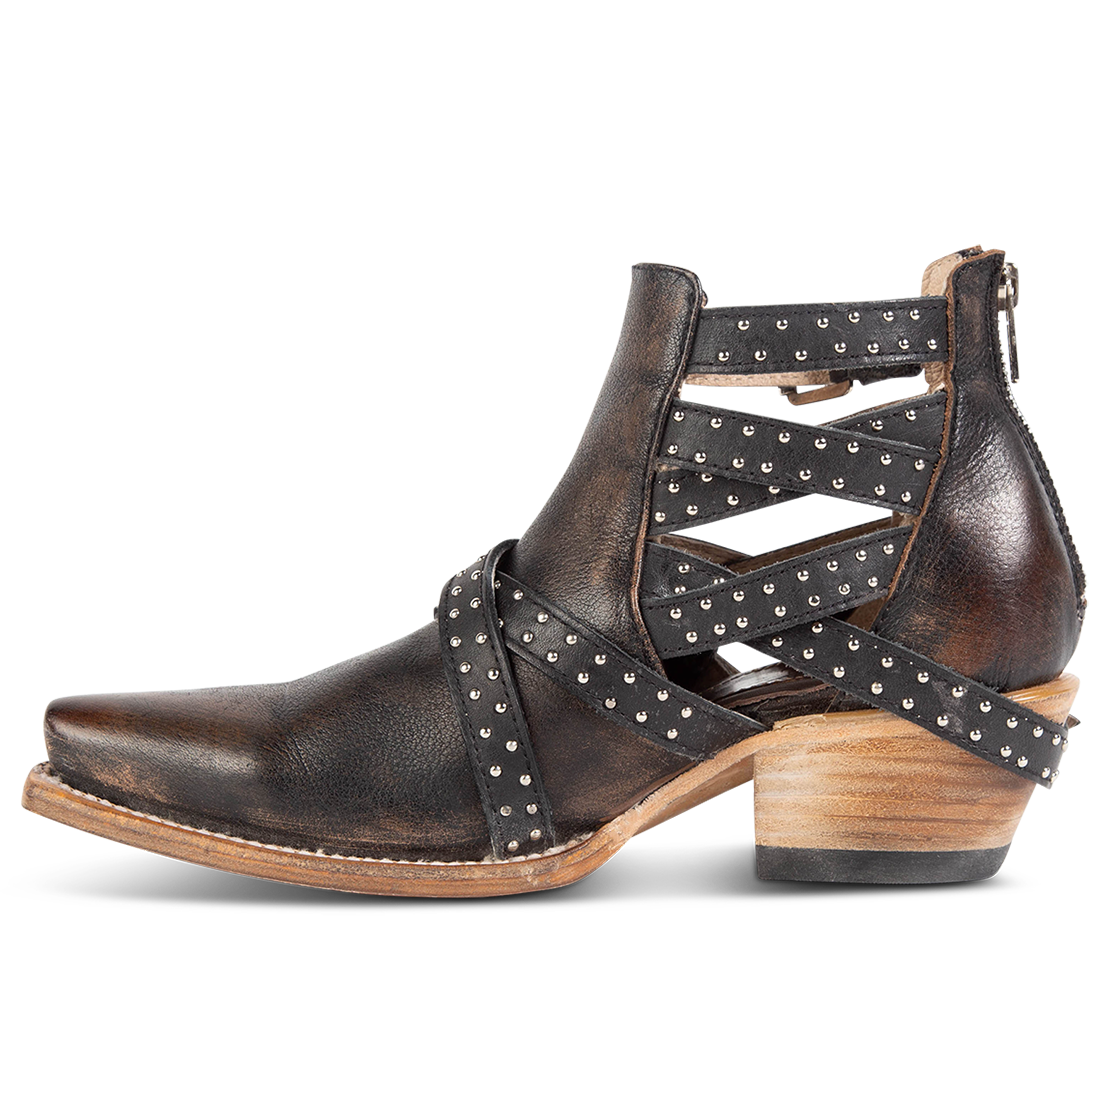 Inside view showing adjustable buckle straps and exposed sides on FREEBIRD women's Wasp black ankle bootie